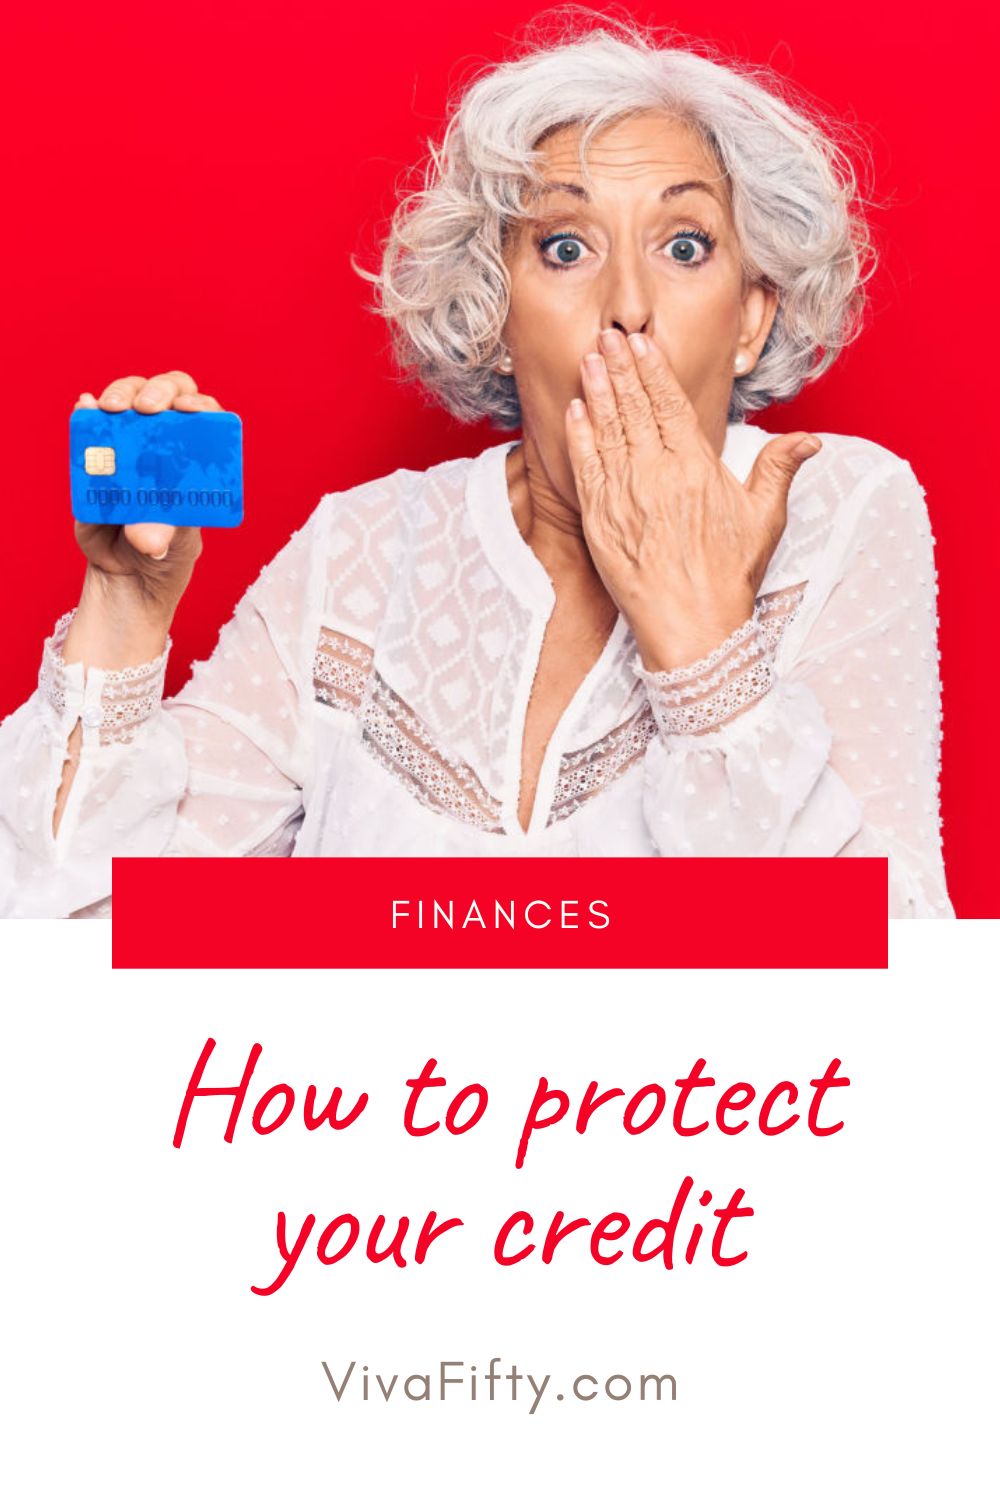 It’s increasingly important to protect your money and credit from scams. These tips will help you be on the lookout and stay safe. 